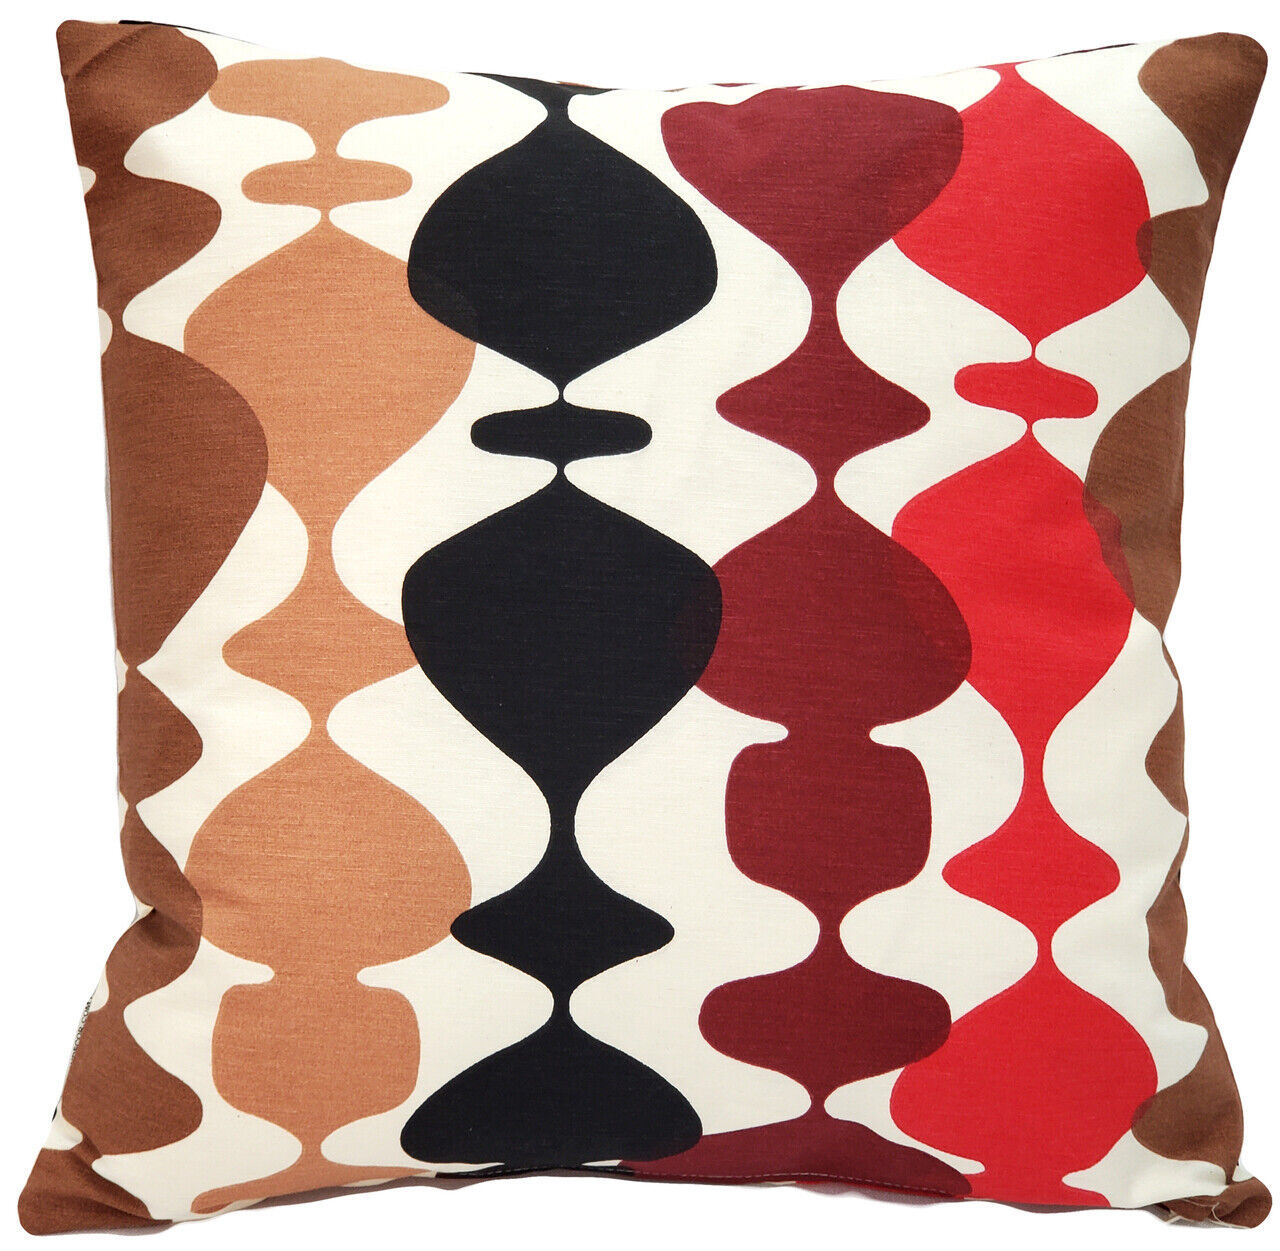 Lava Lamp Red 20x20 Throw Pillow, Complete with Pillow Insert - $41.95